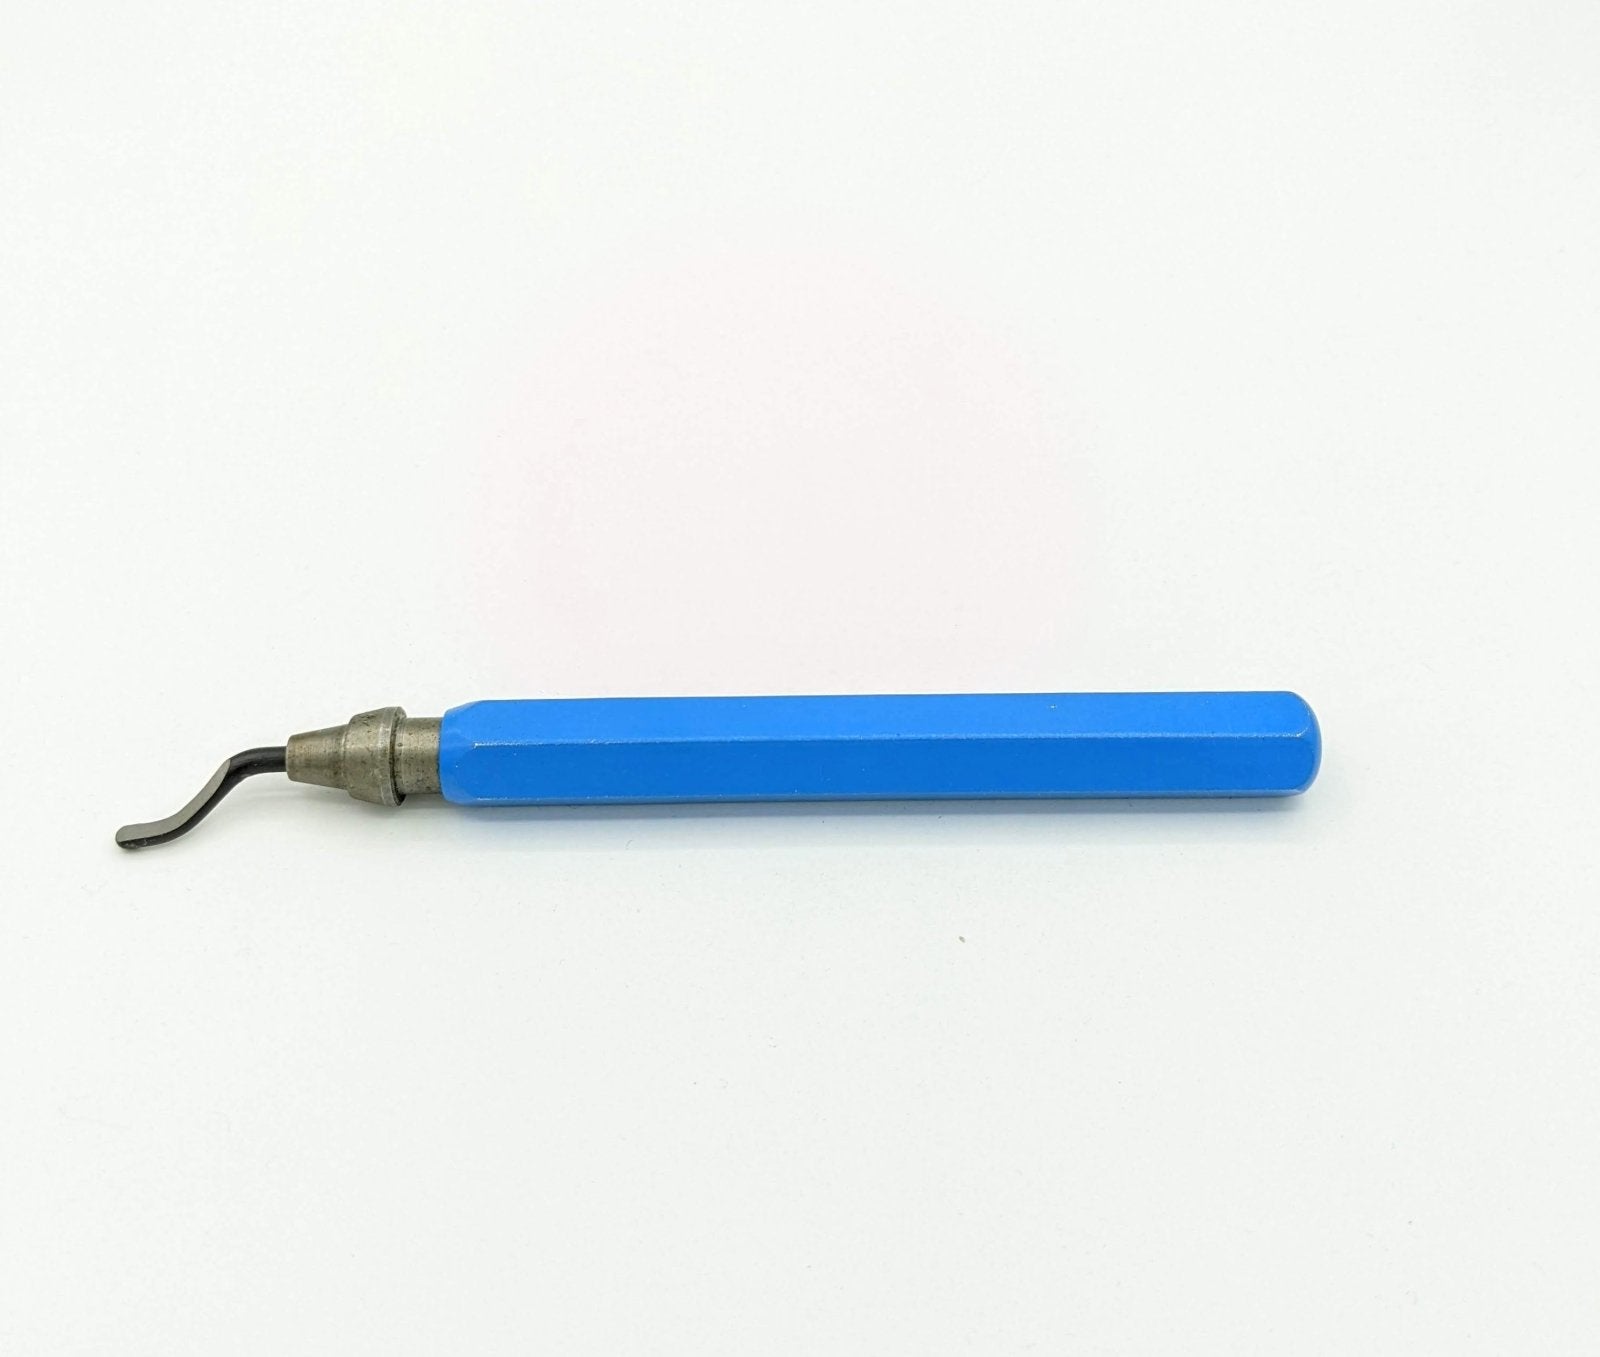 Reamer Deburring Tool for Metal and Plastic Pipe With S10 Blade